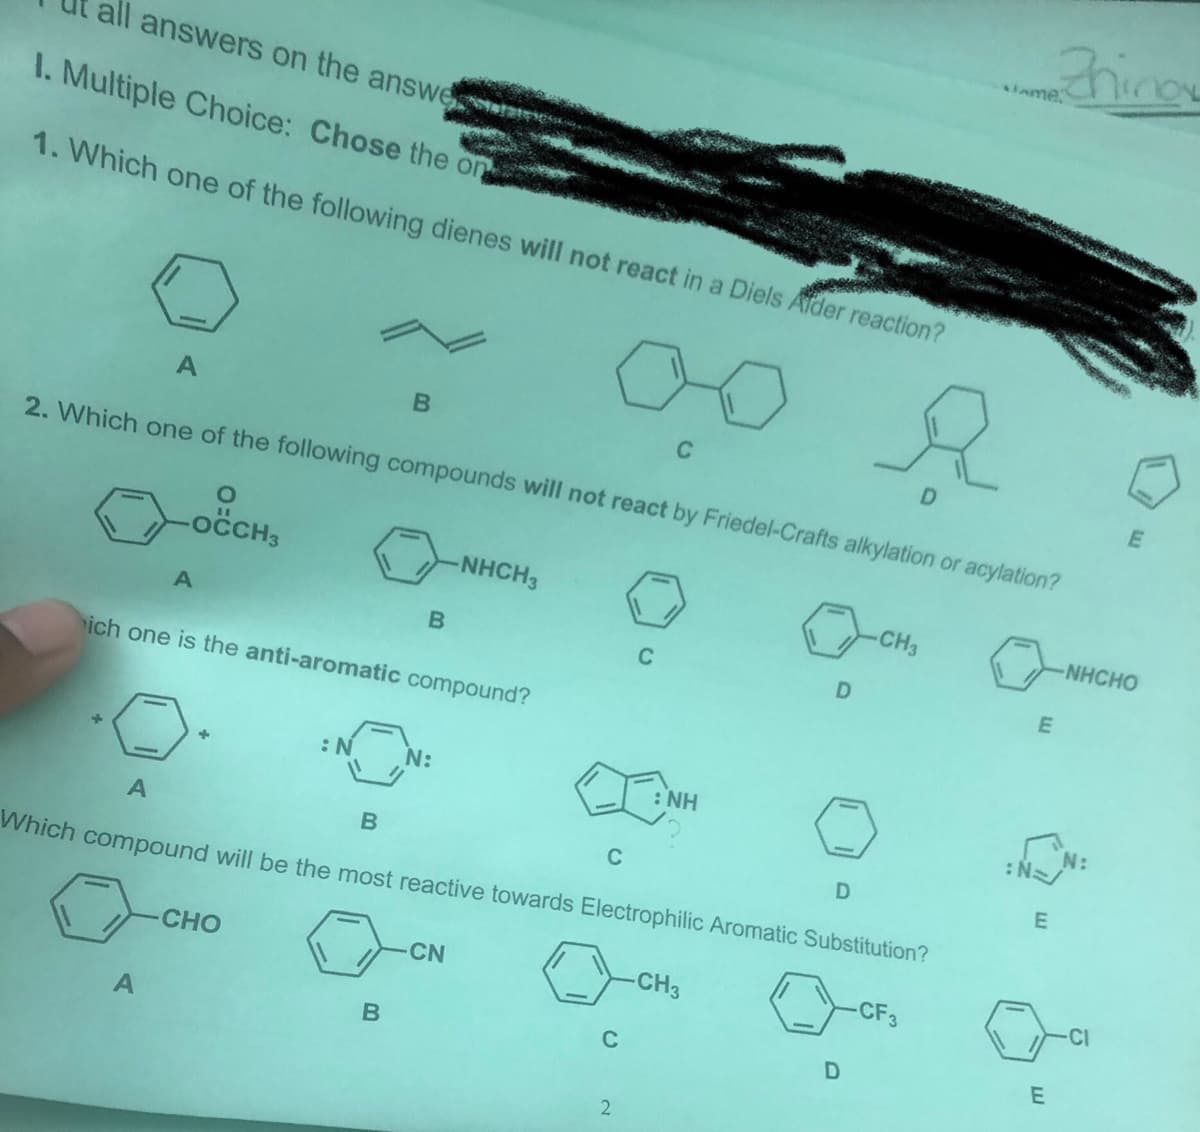 Zhino
slame.
all answers on the answe
I. Multiple Choice: Chose the on
1. Which one of the following dienes will not react in a Diels Afder reaction?
C
D
E
2. Which one of the following compounds will not react by Friedel-Crafts alkylation or acylation?
NHCH3
CH3
NHCHO
C
D
ich one is the anti-aromatic compound?
:N
N:
: NH
C
Which compound will be the most reactive towards Electrophilic Aromatic Substitution?
CHO
CN
CH3
CF3
CI
C
2
